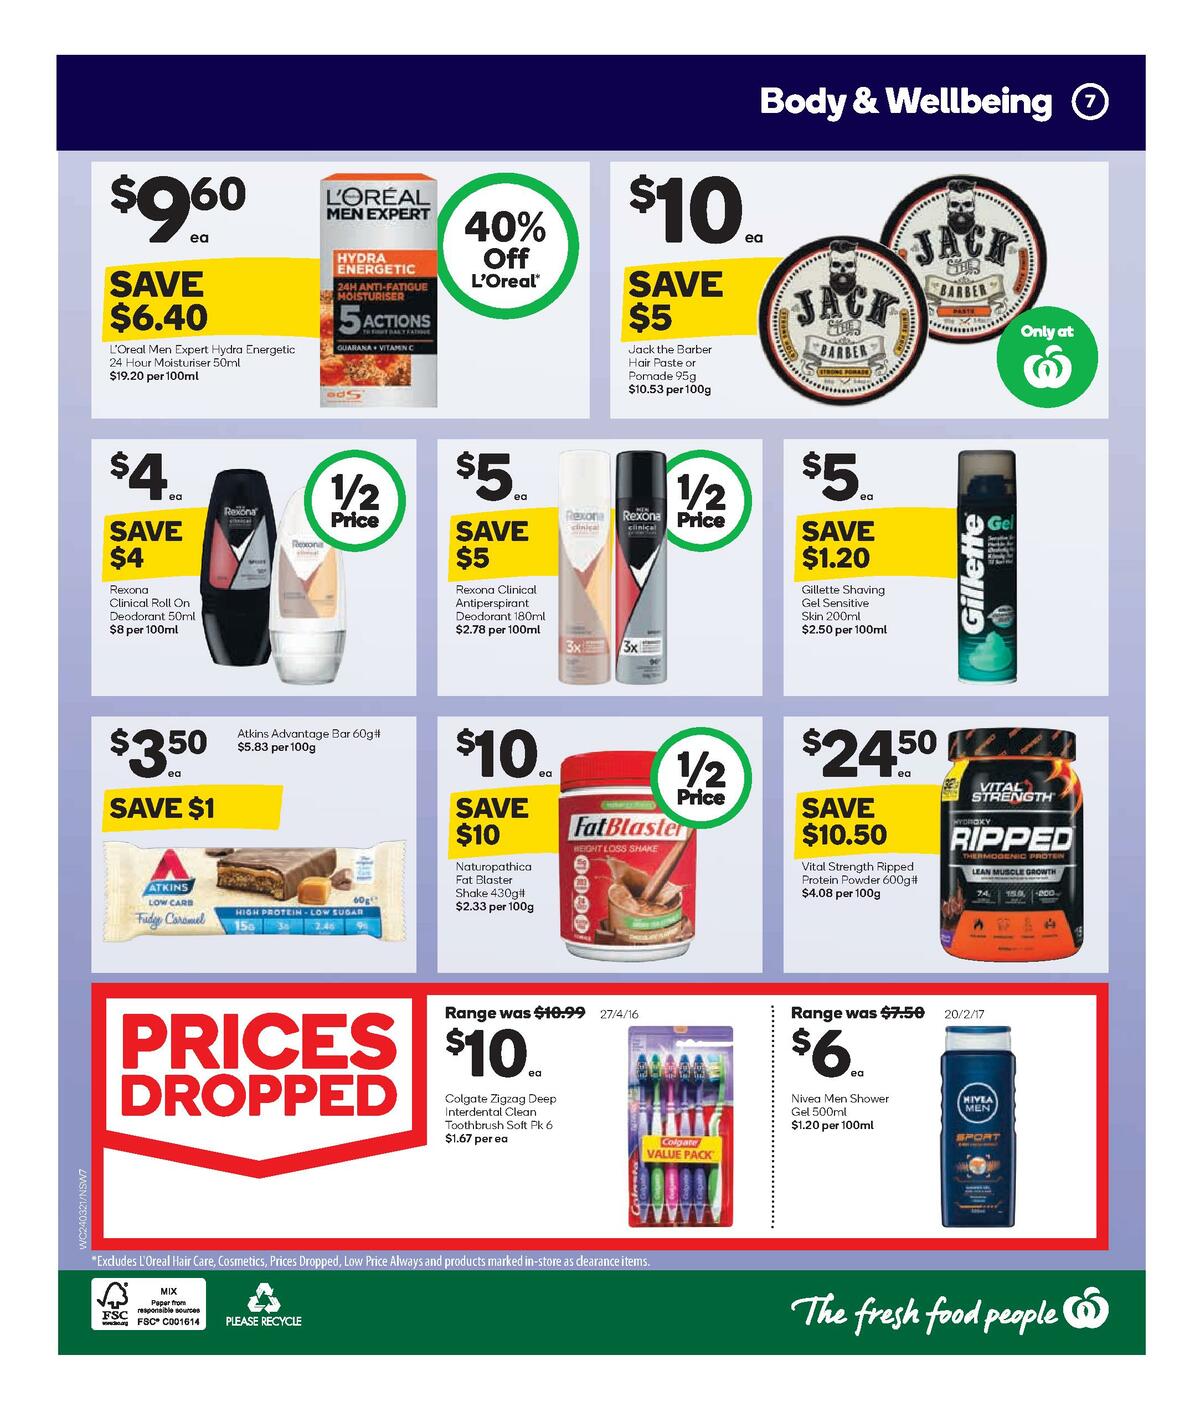 Woolworths Health & Beauty Catalogues from 24 March